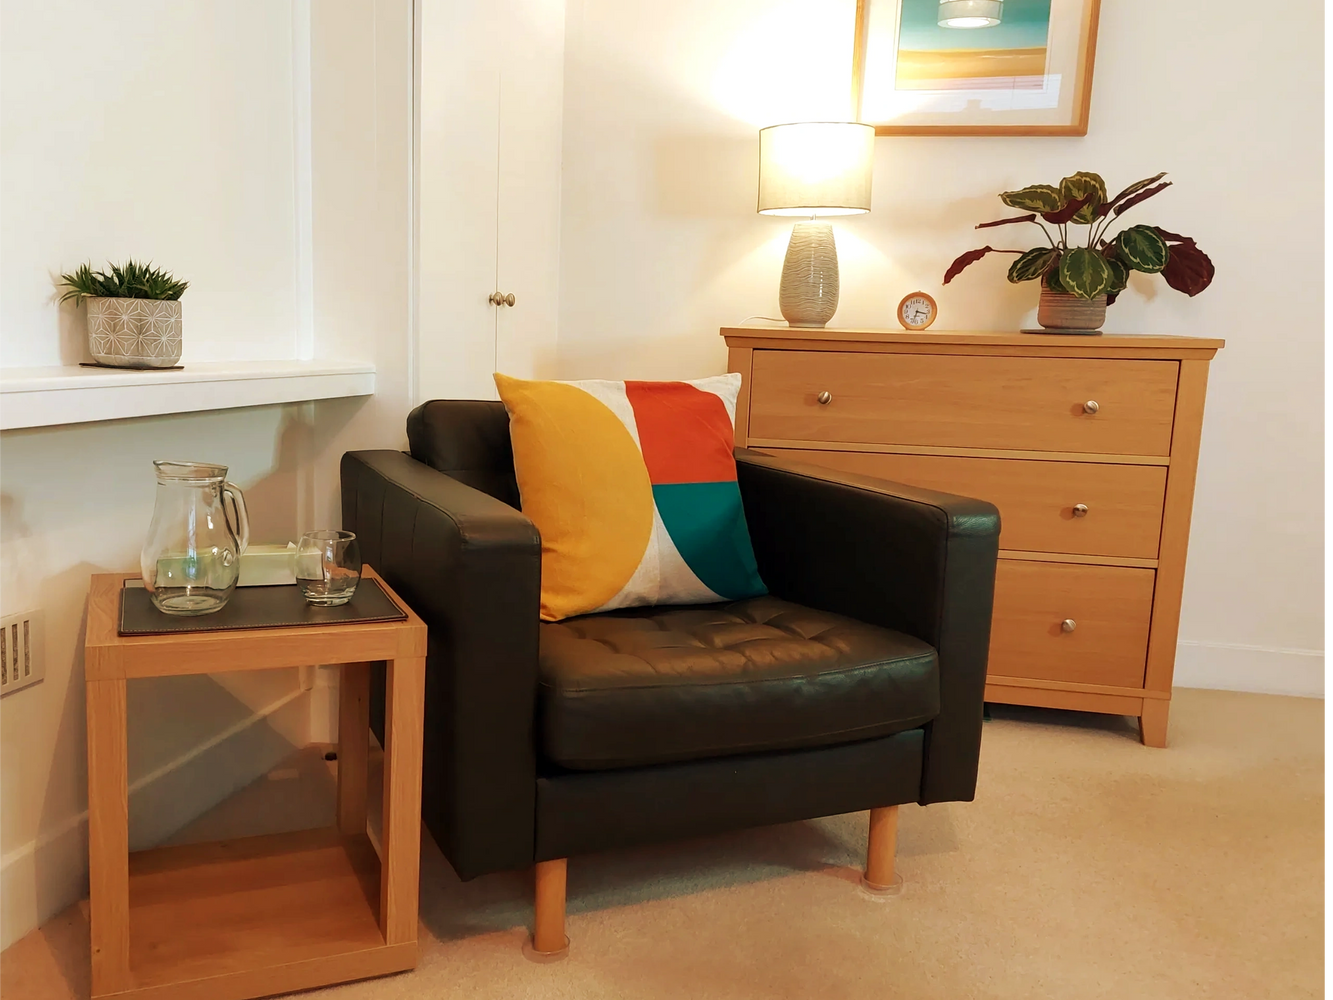 Brown leather armchair, side table, chest of drawers with lamp and plant on top in therapy room.